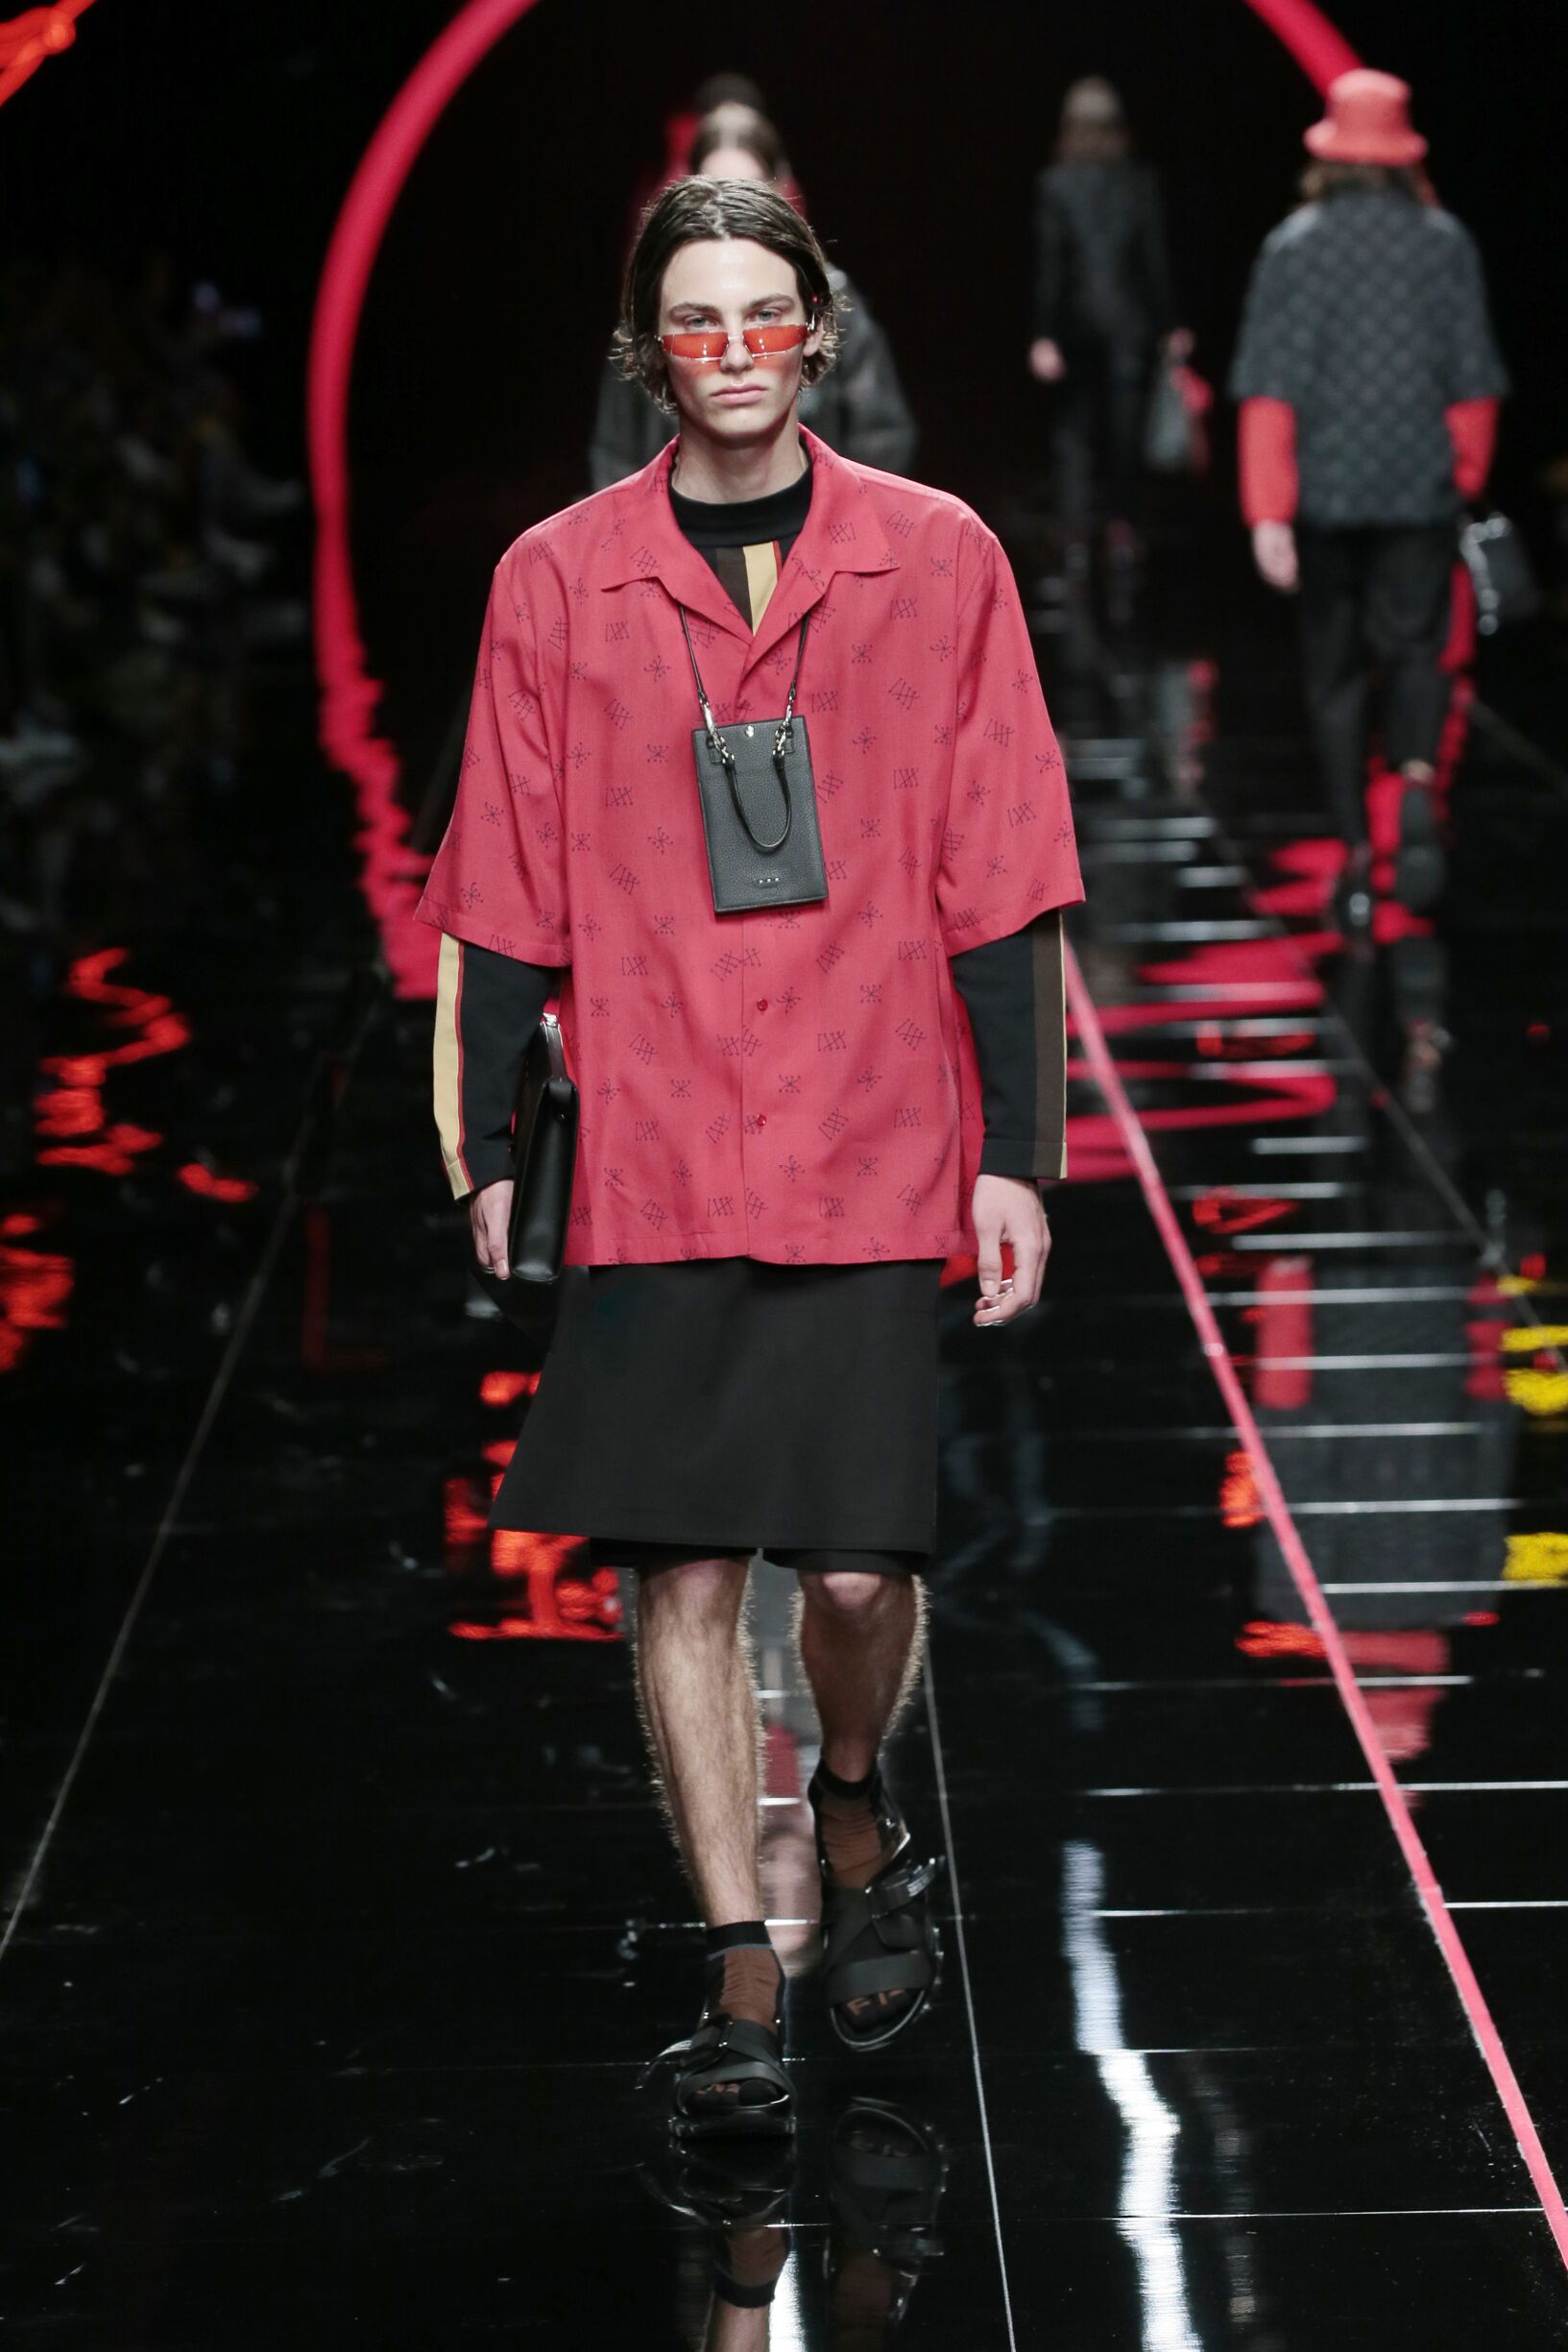 FENDI SPRING SUMMER 2019 MEN’S COLLECTION | The Skinny Beep1633 x 2449